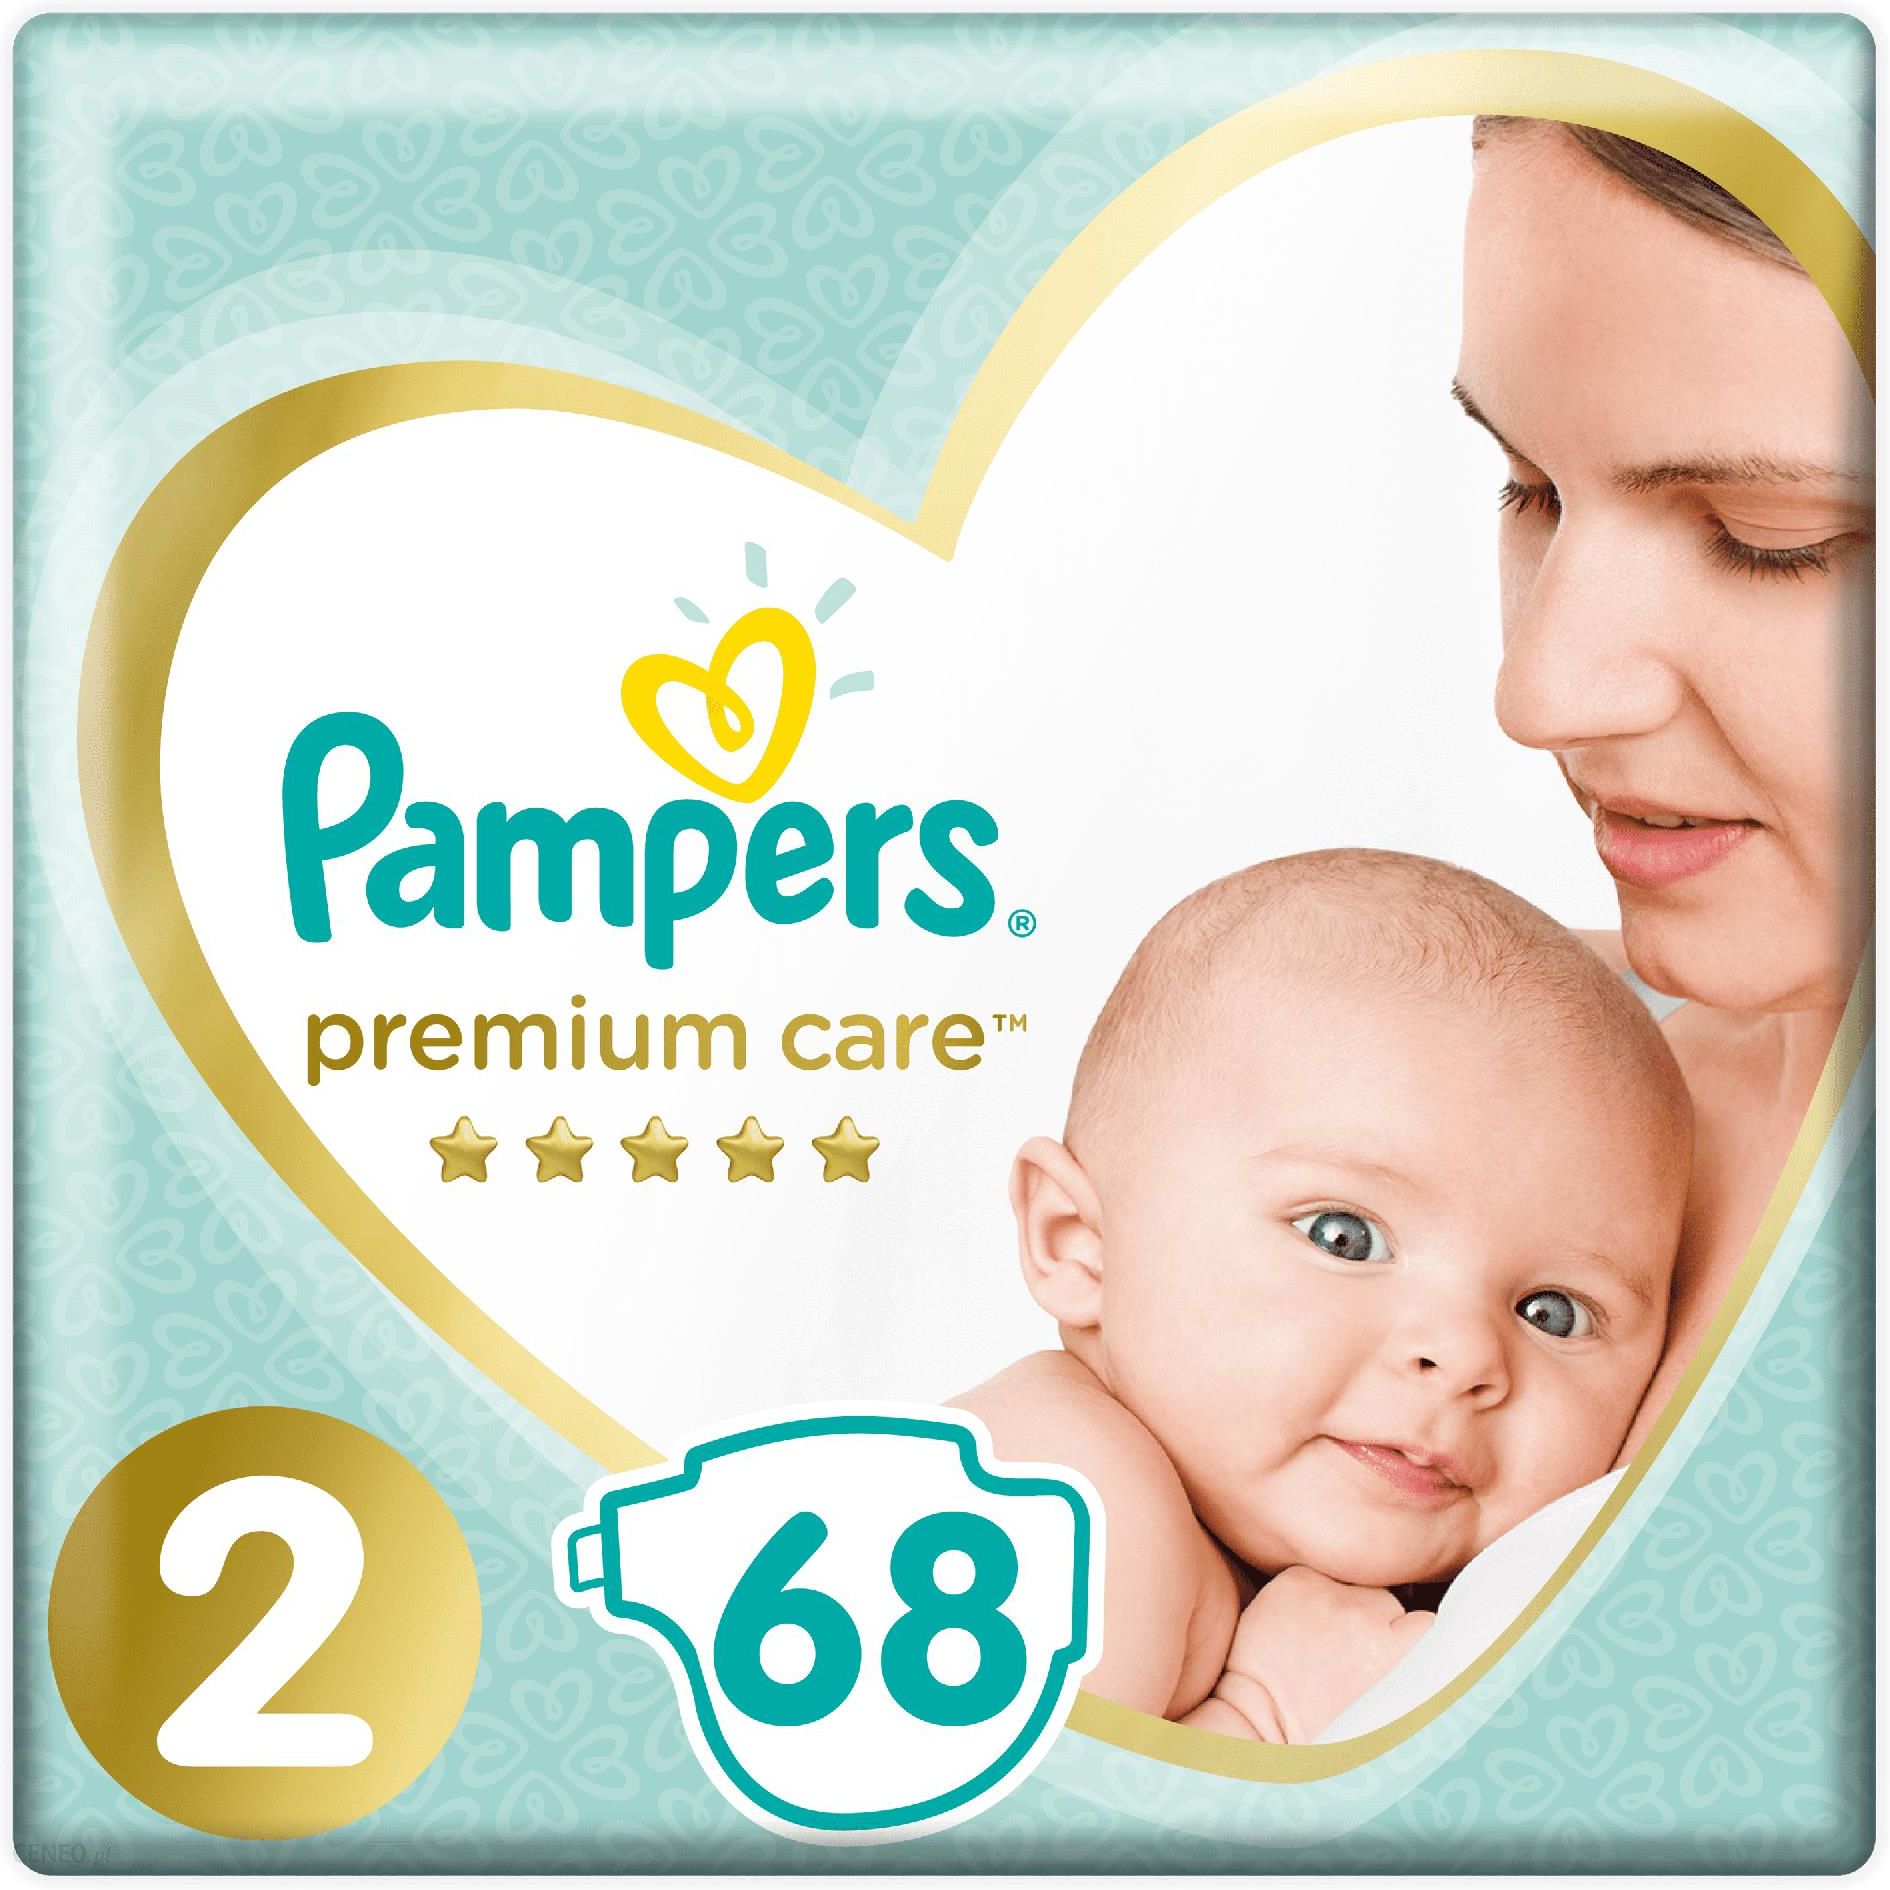 pampers 5 i 6 monthly pack